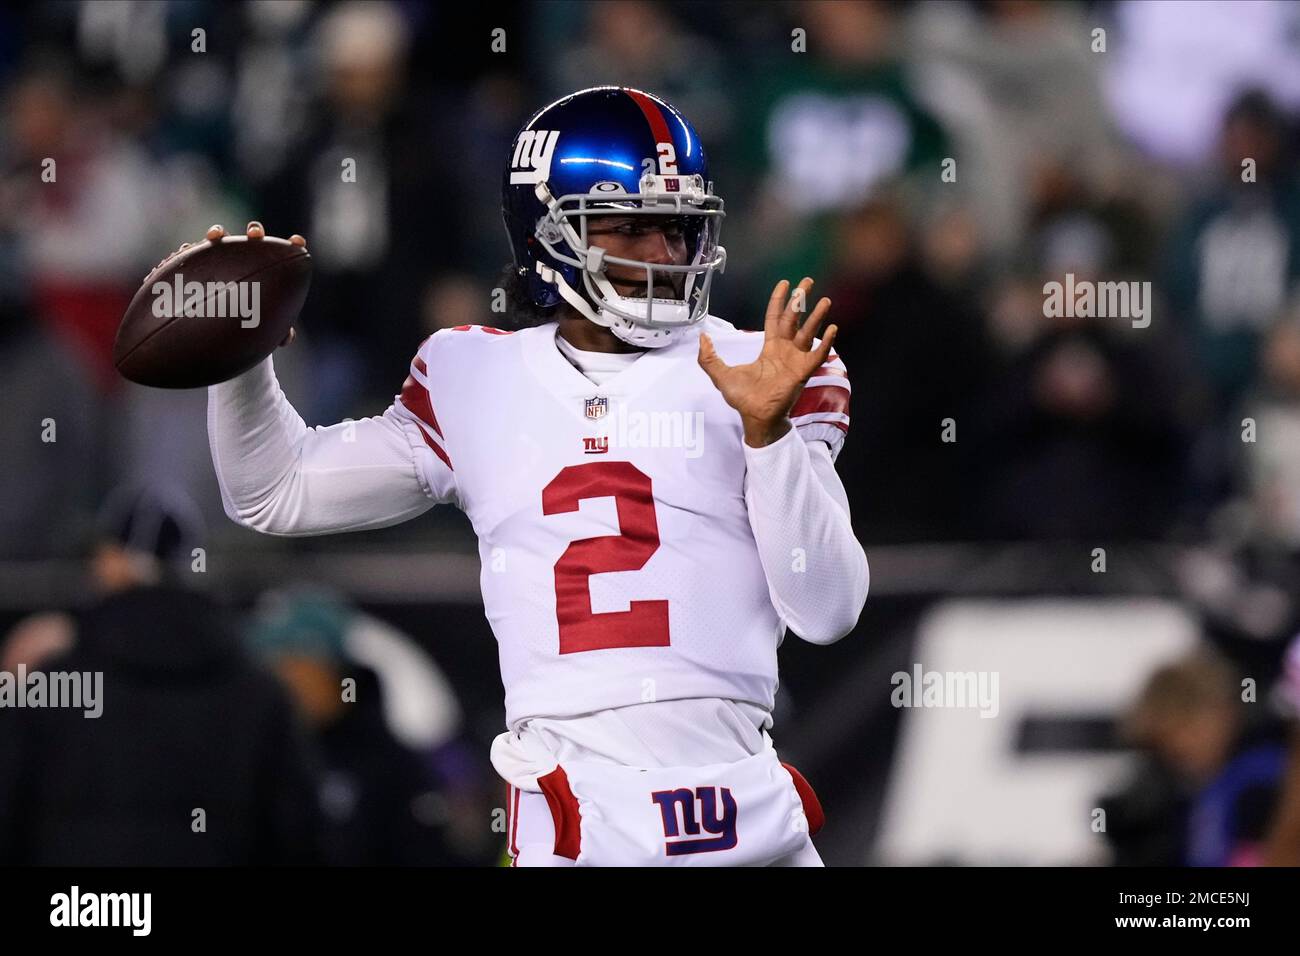 New Jersey, USA. 28th Aug, 2022. August 28, 2022, East Rutherford, New  Jersey, USA: New York Giants quarterback Tyrod Taylor (2) jogs off the  field after a hit by New York Jets